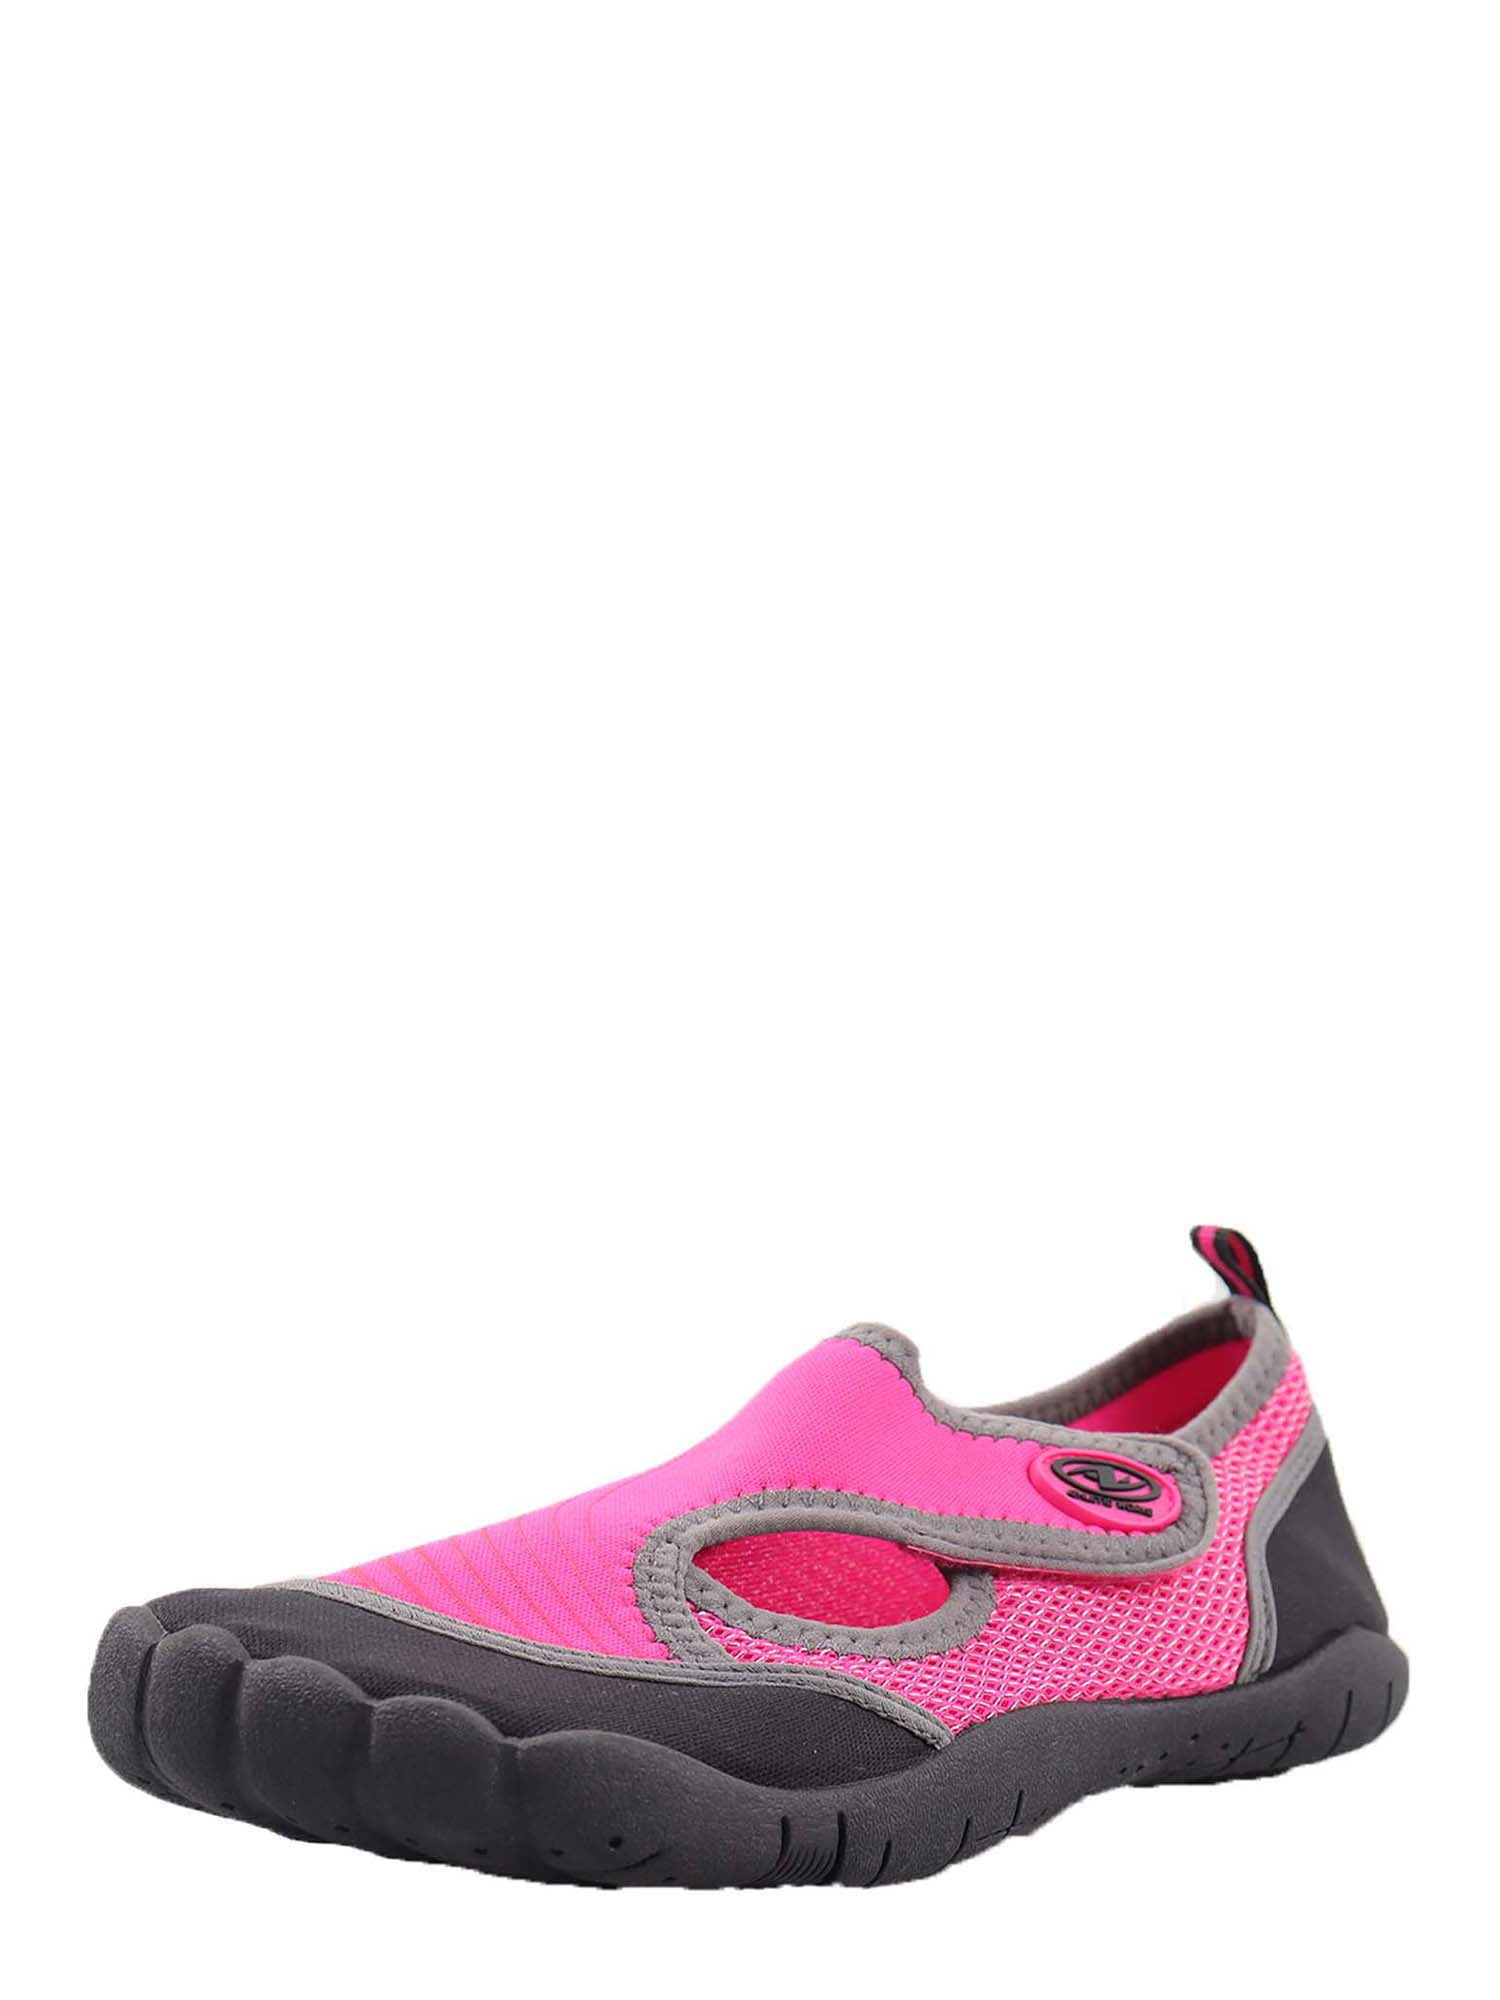 Athletic Works Women's Caged Water Shoe Size 11/12 Coral Gray Beach Clog NEW 